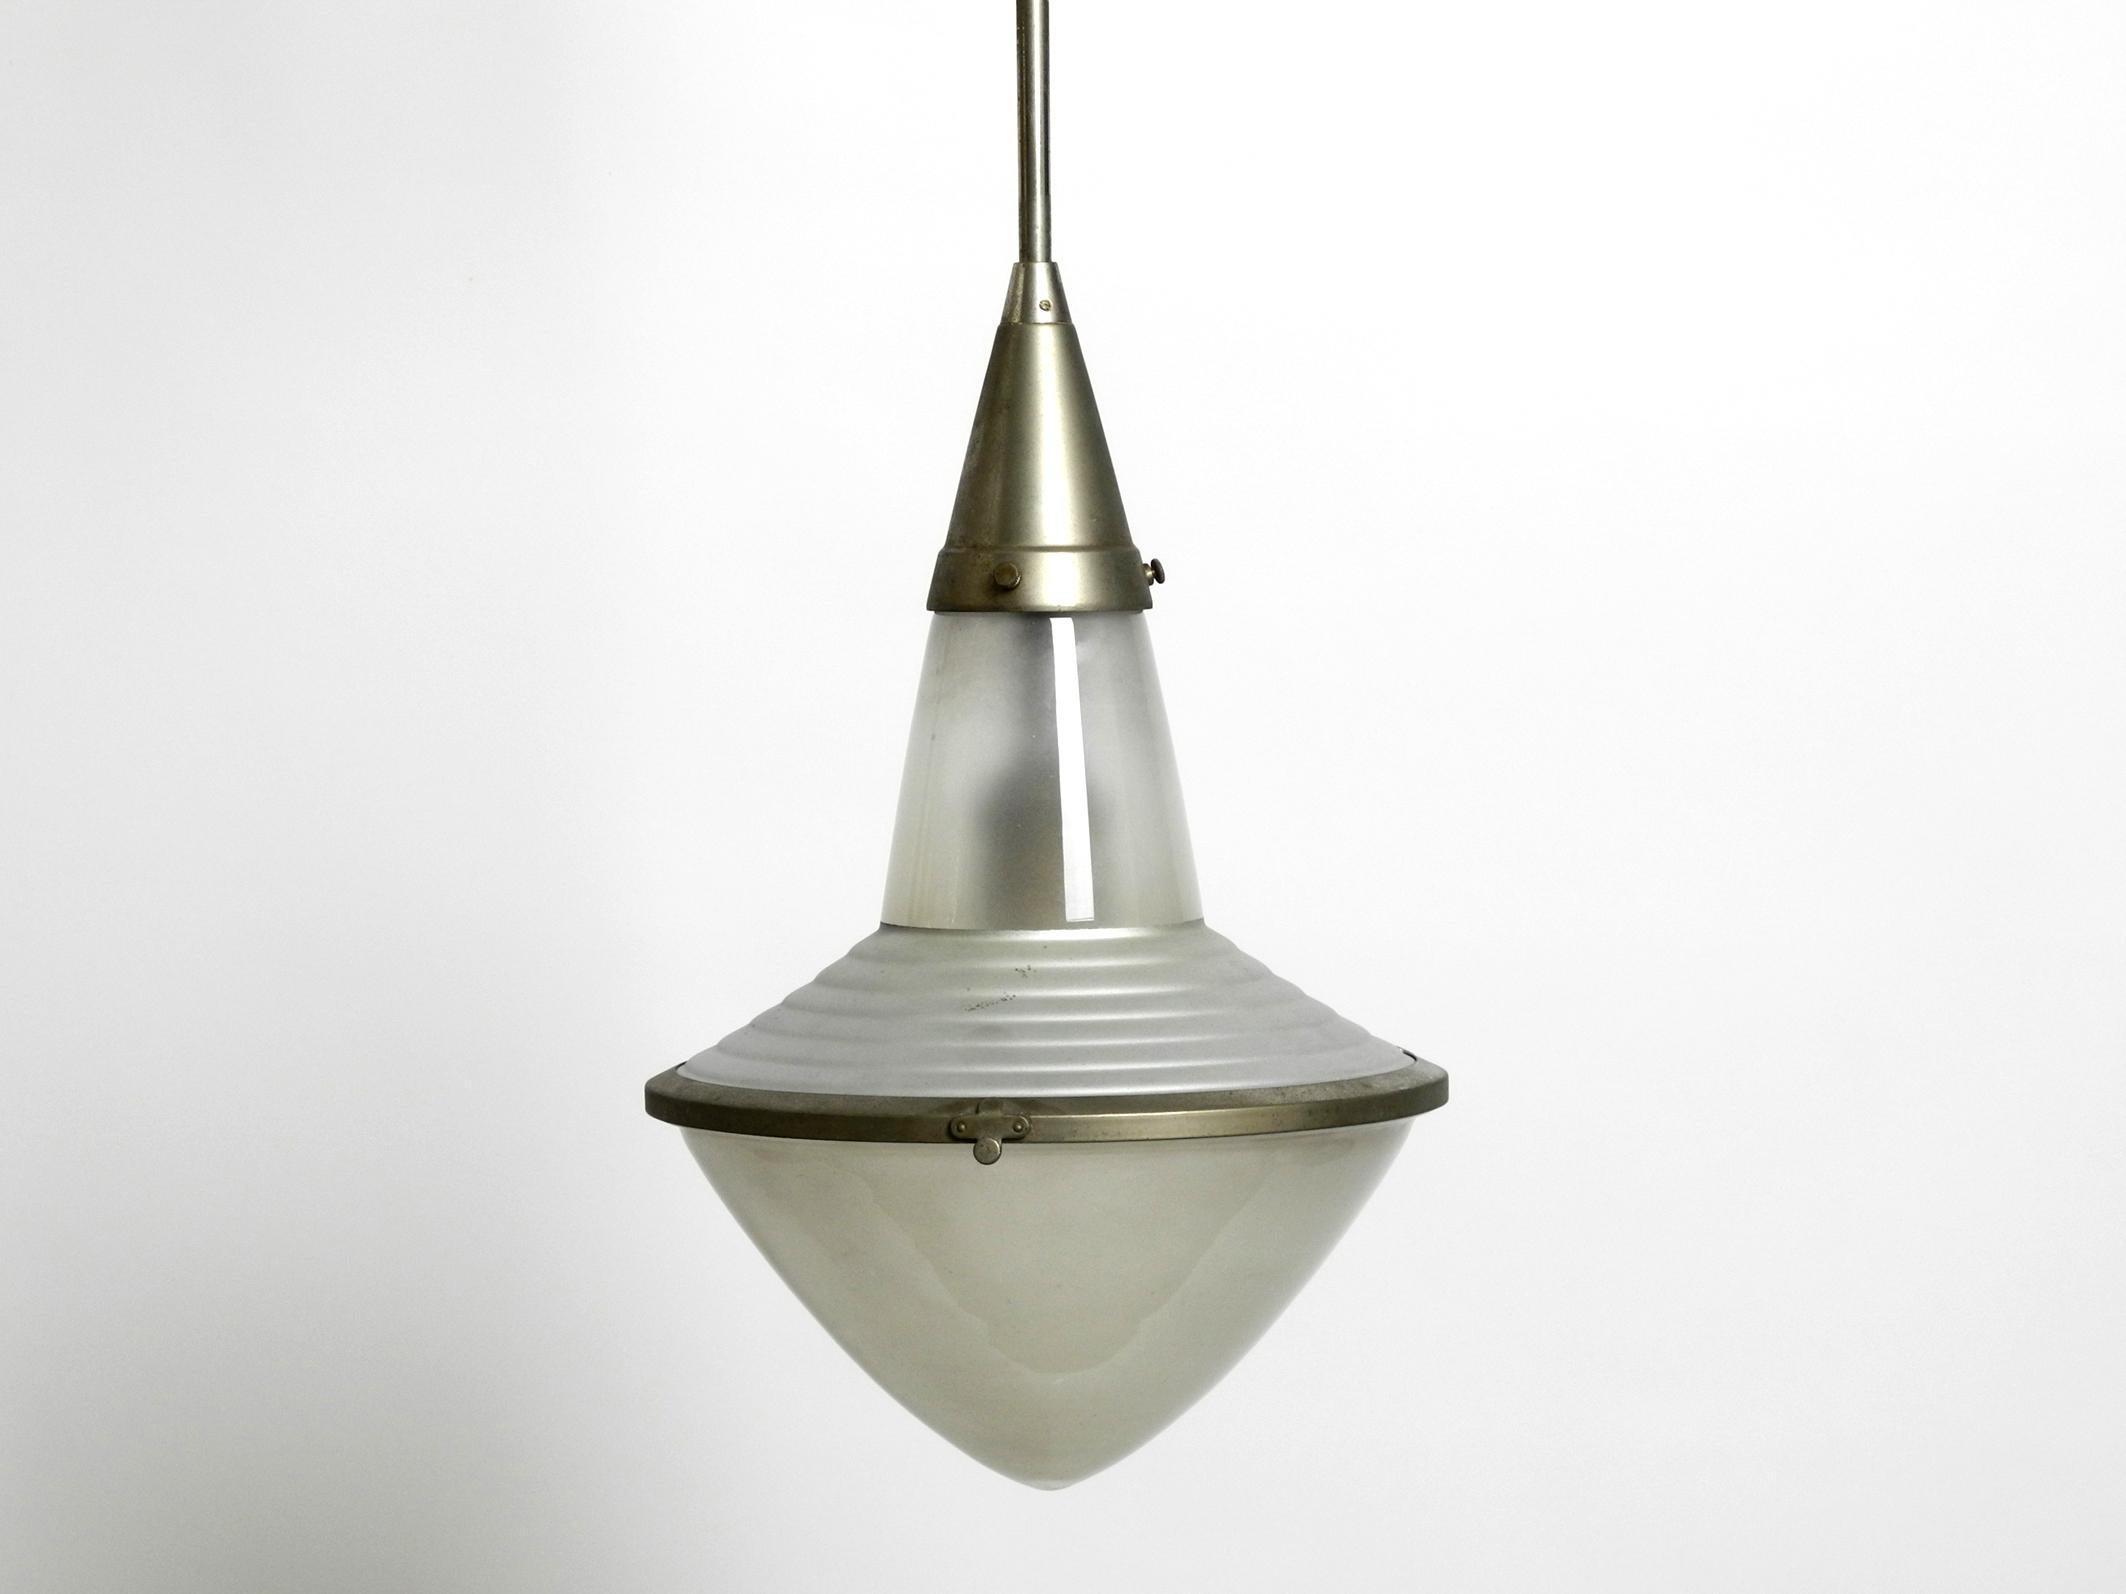 Rare 1930s Pendant Lamp by Adolf Meyer for Zeiss Ikon with an Adjustable Shade 5